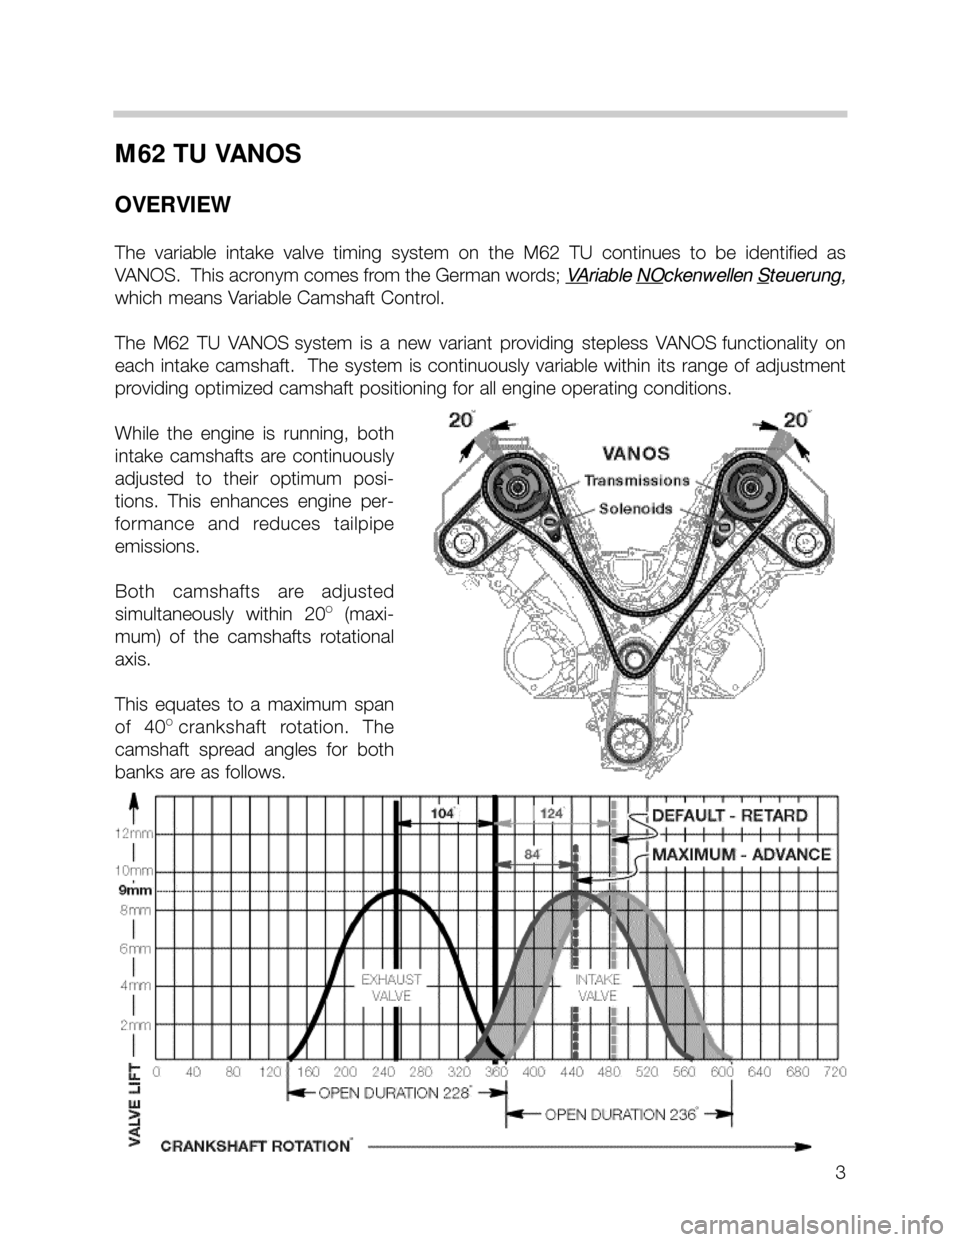 BMW X5 2000 E53 M62TU Engine Workshop Manual 3
M62 TU VANOS
OVERVIEW
The  variable  intake  valve  timing  system  on  the  M62  TU  continues  to  be  identified  as
VANOS.  This acronym comes from the German words; V
Ariable NOckenwellen Steue